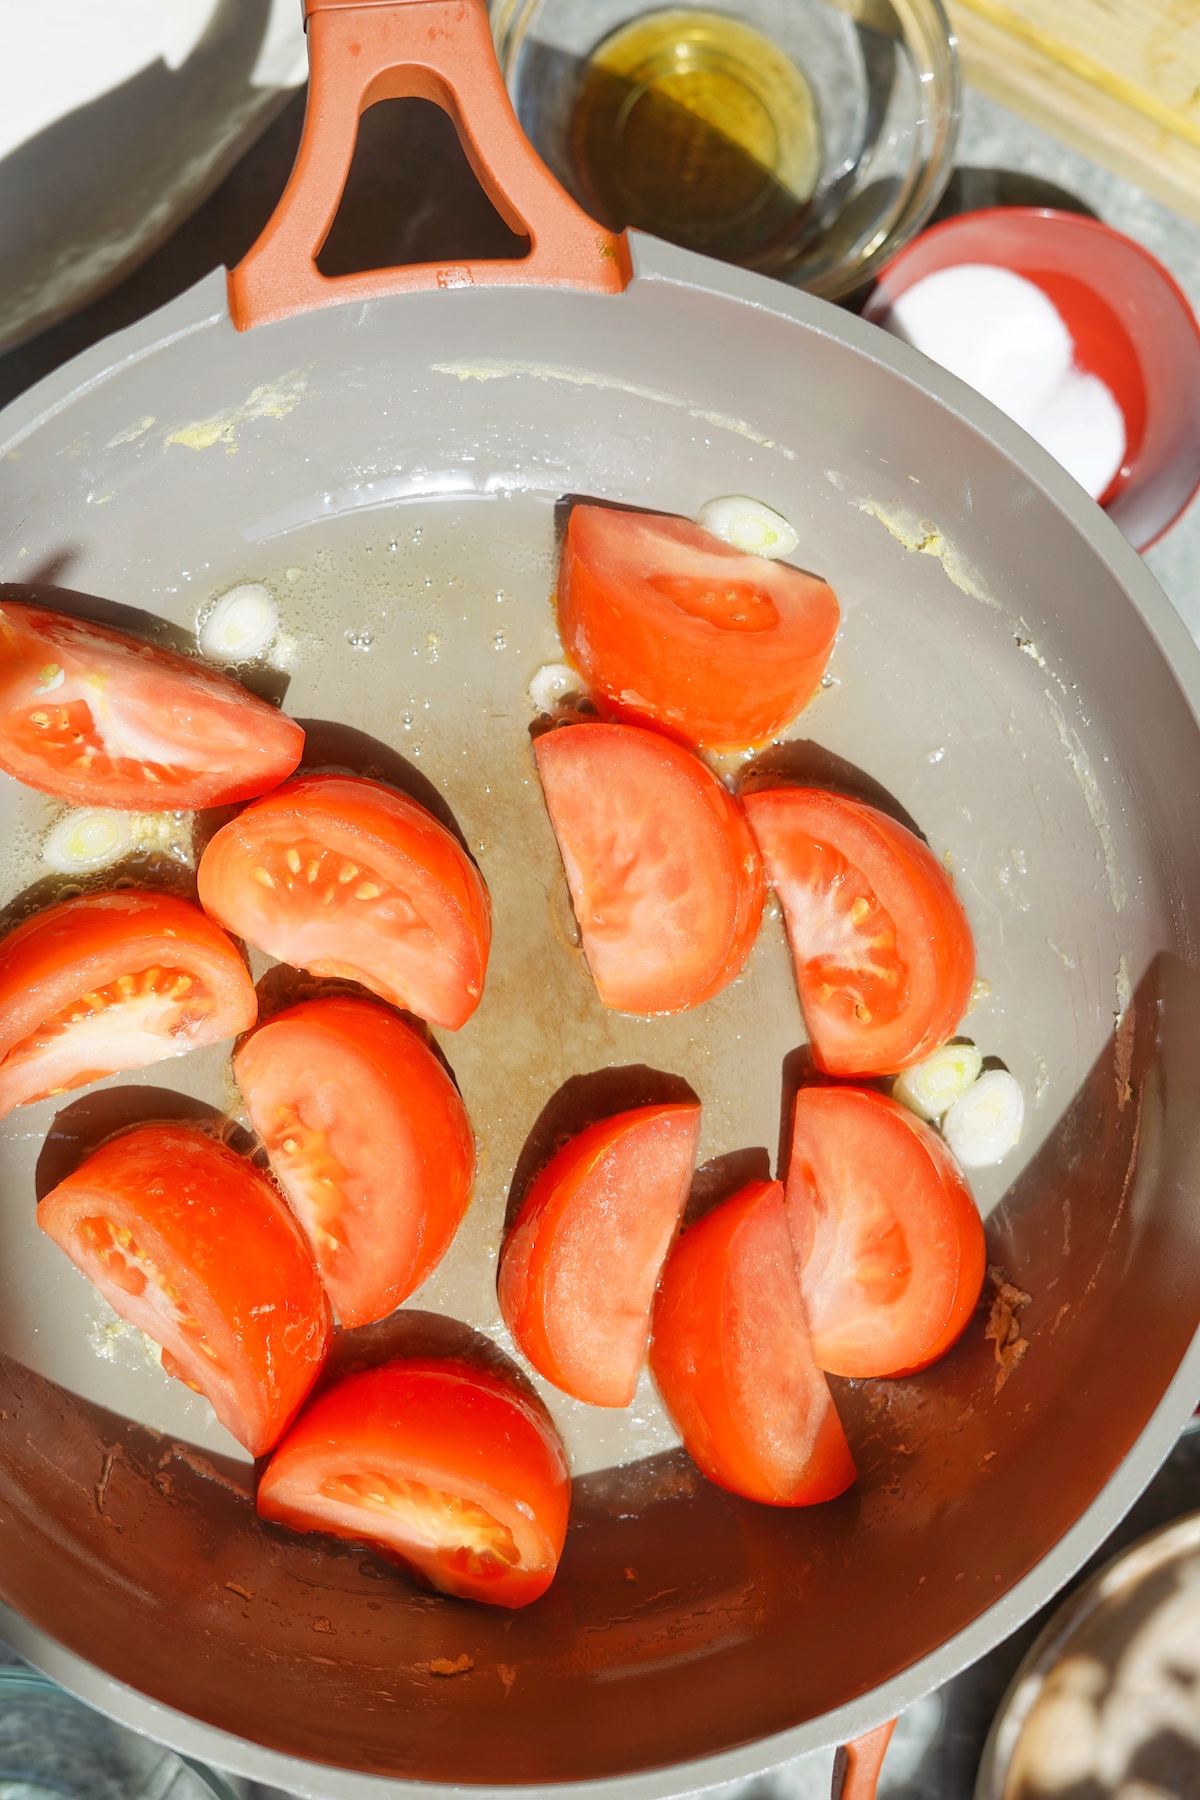 Tomatoes cooking in the large pan.